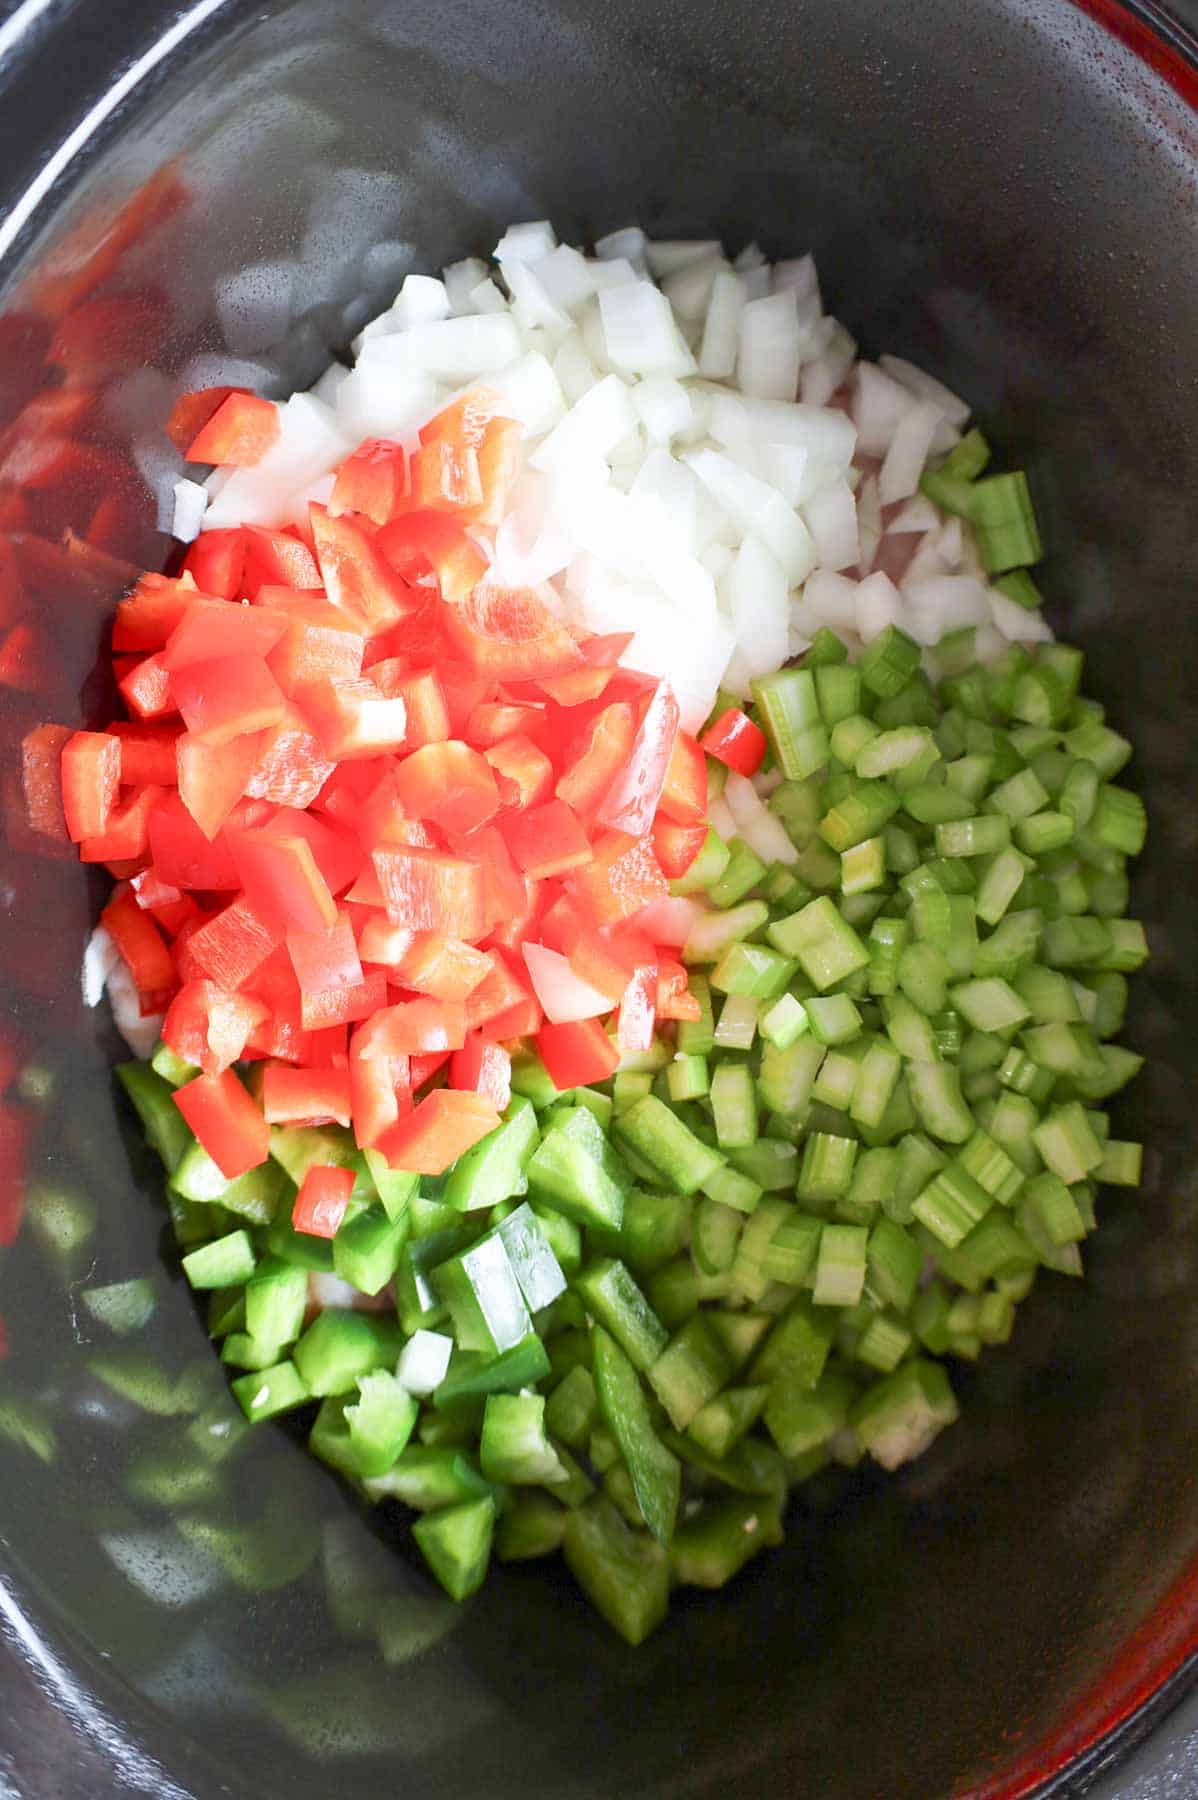 diced onions, celery, red and green bell peppers and chicken thighs in a Crock Pot